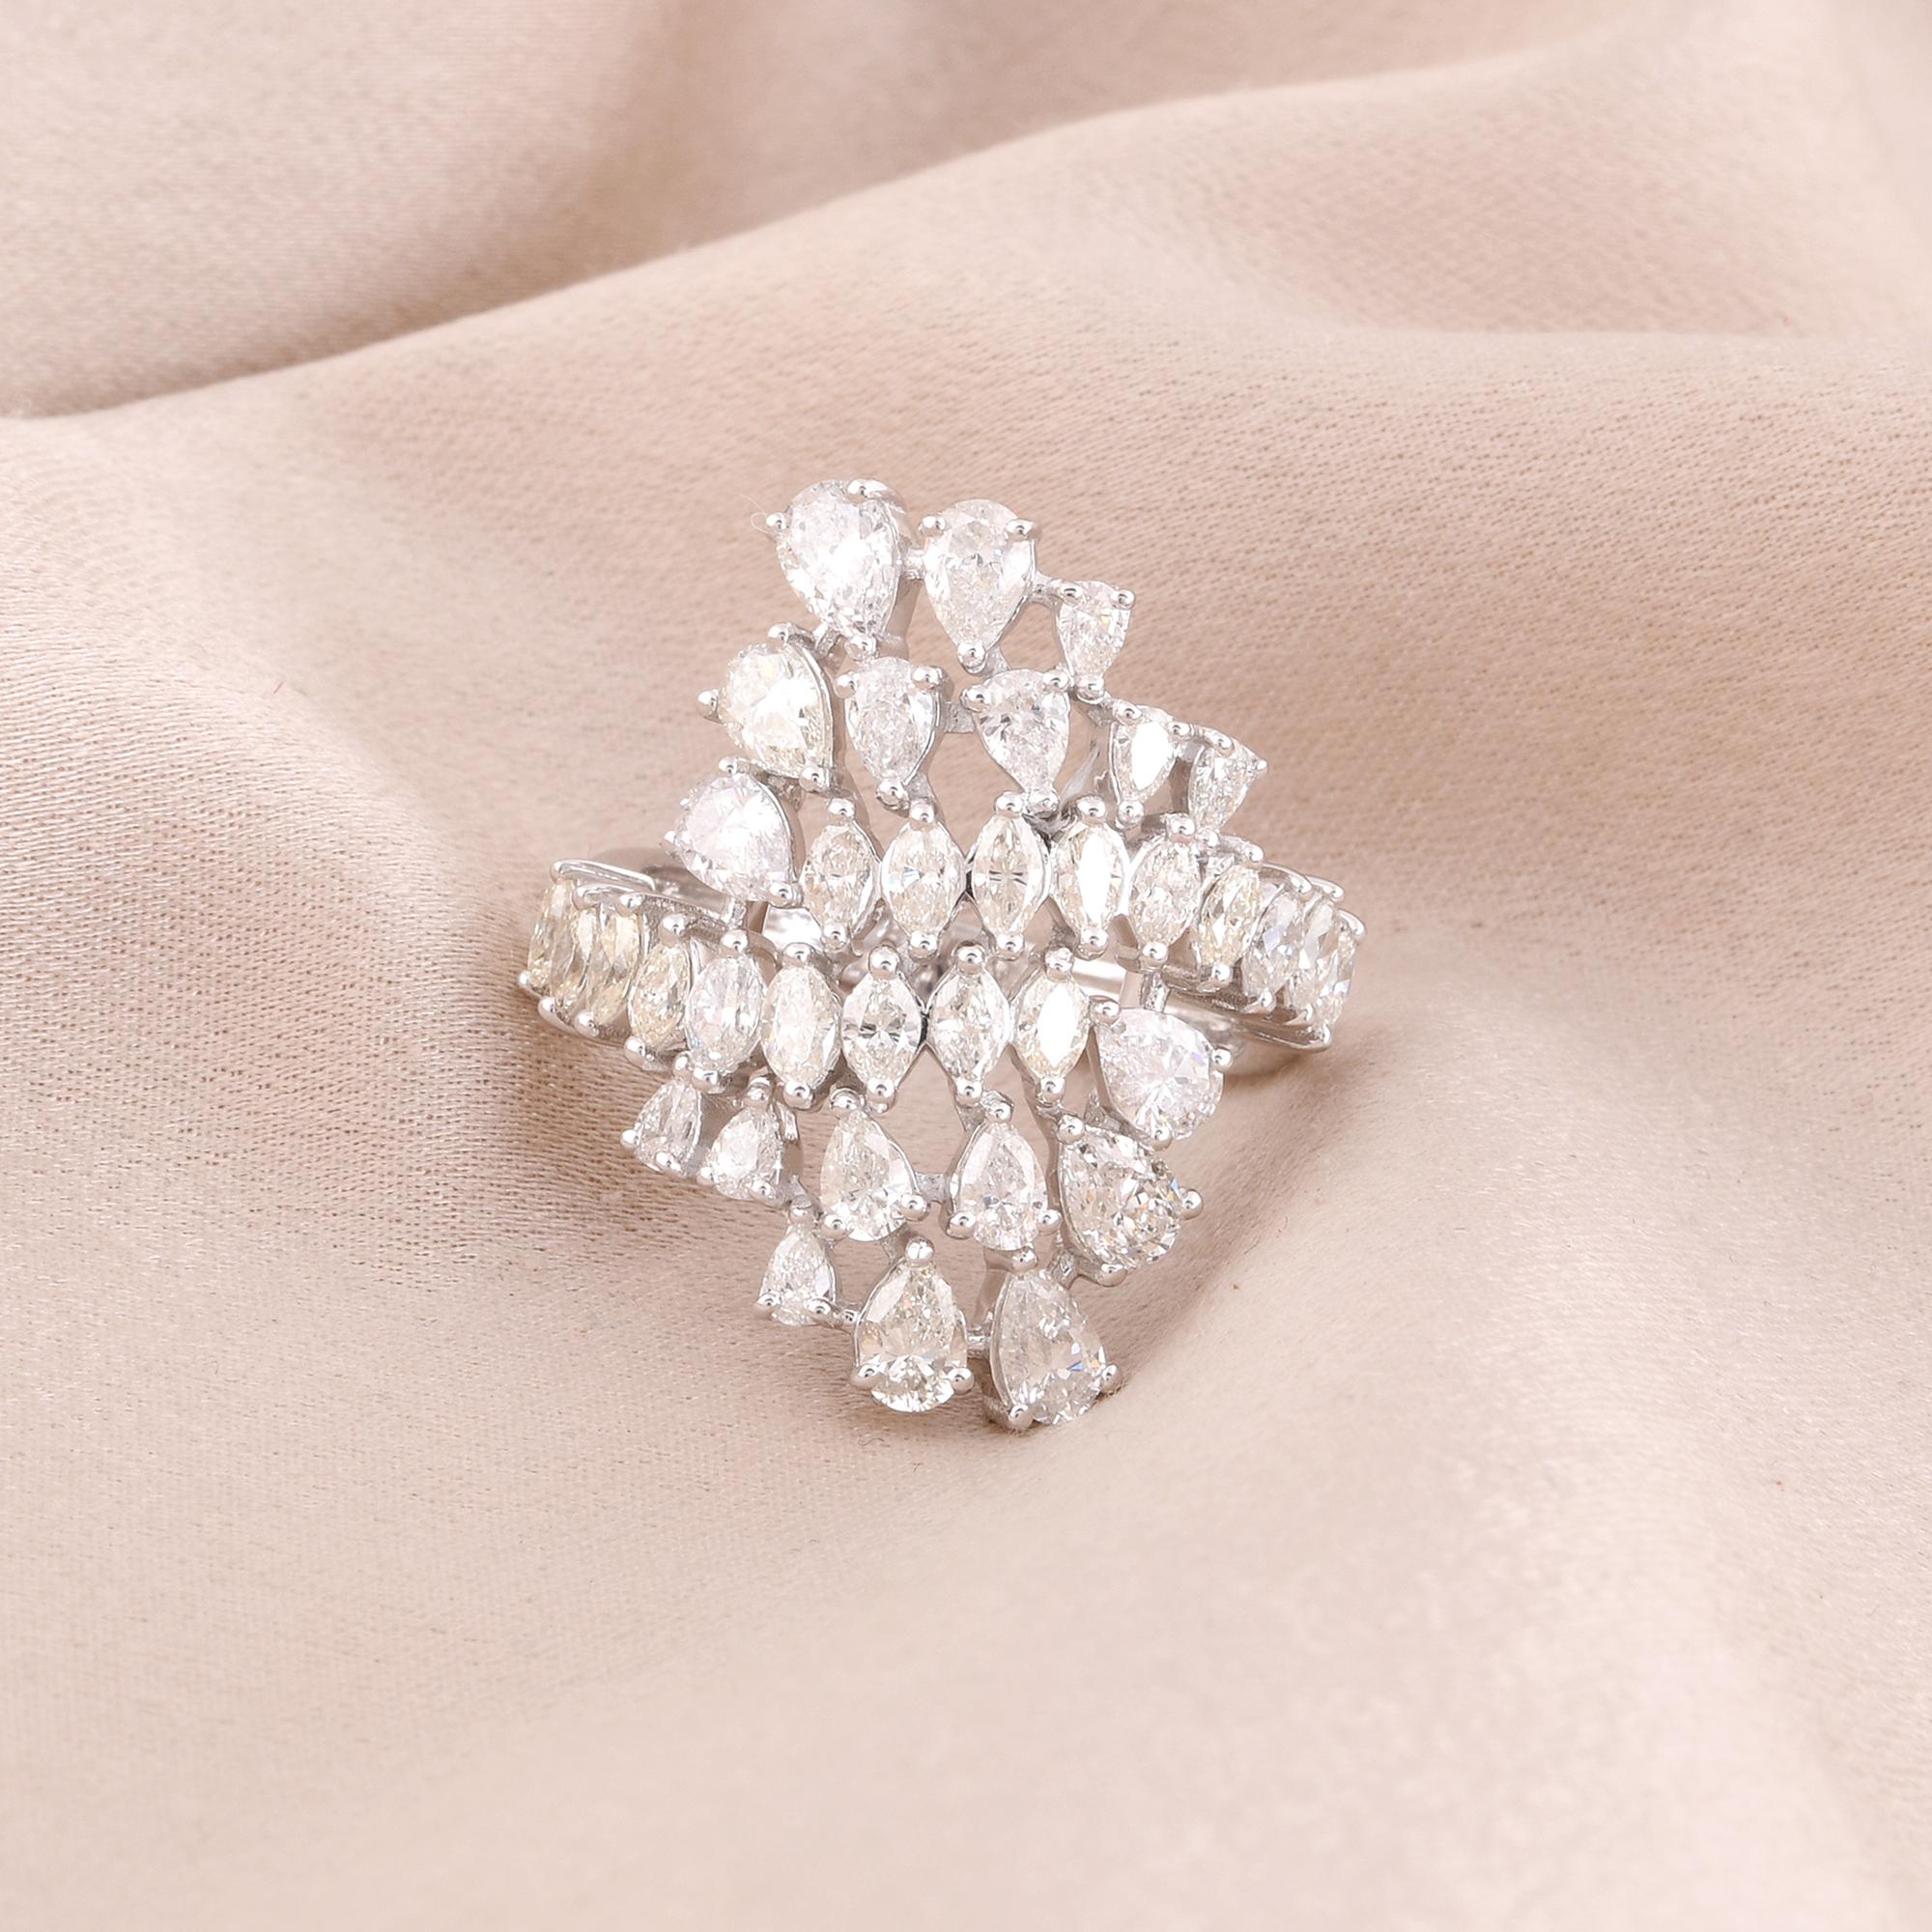 Taille poire 2.71 Carat Marquise & Pear Diamond Cocktail Ring 14 Karat White Gold Jewelry en vente